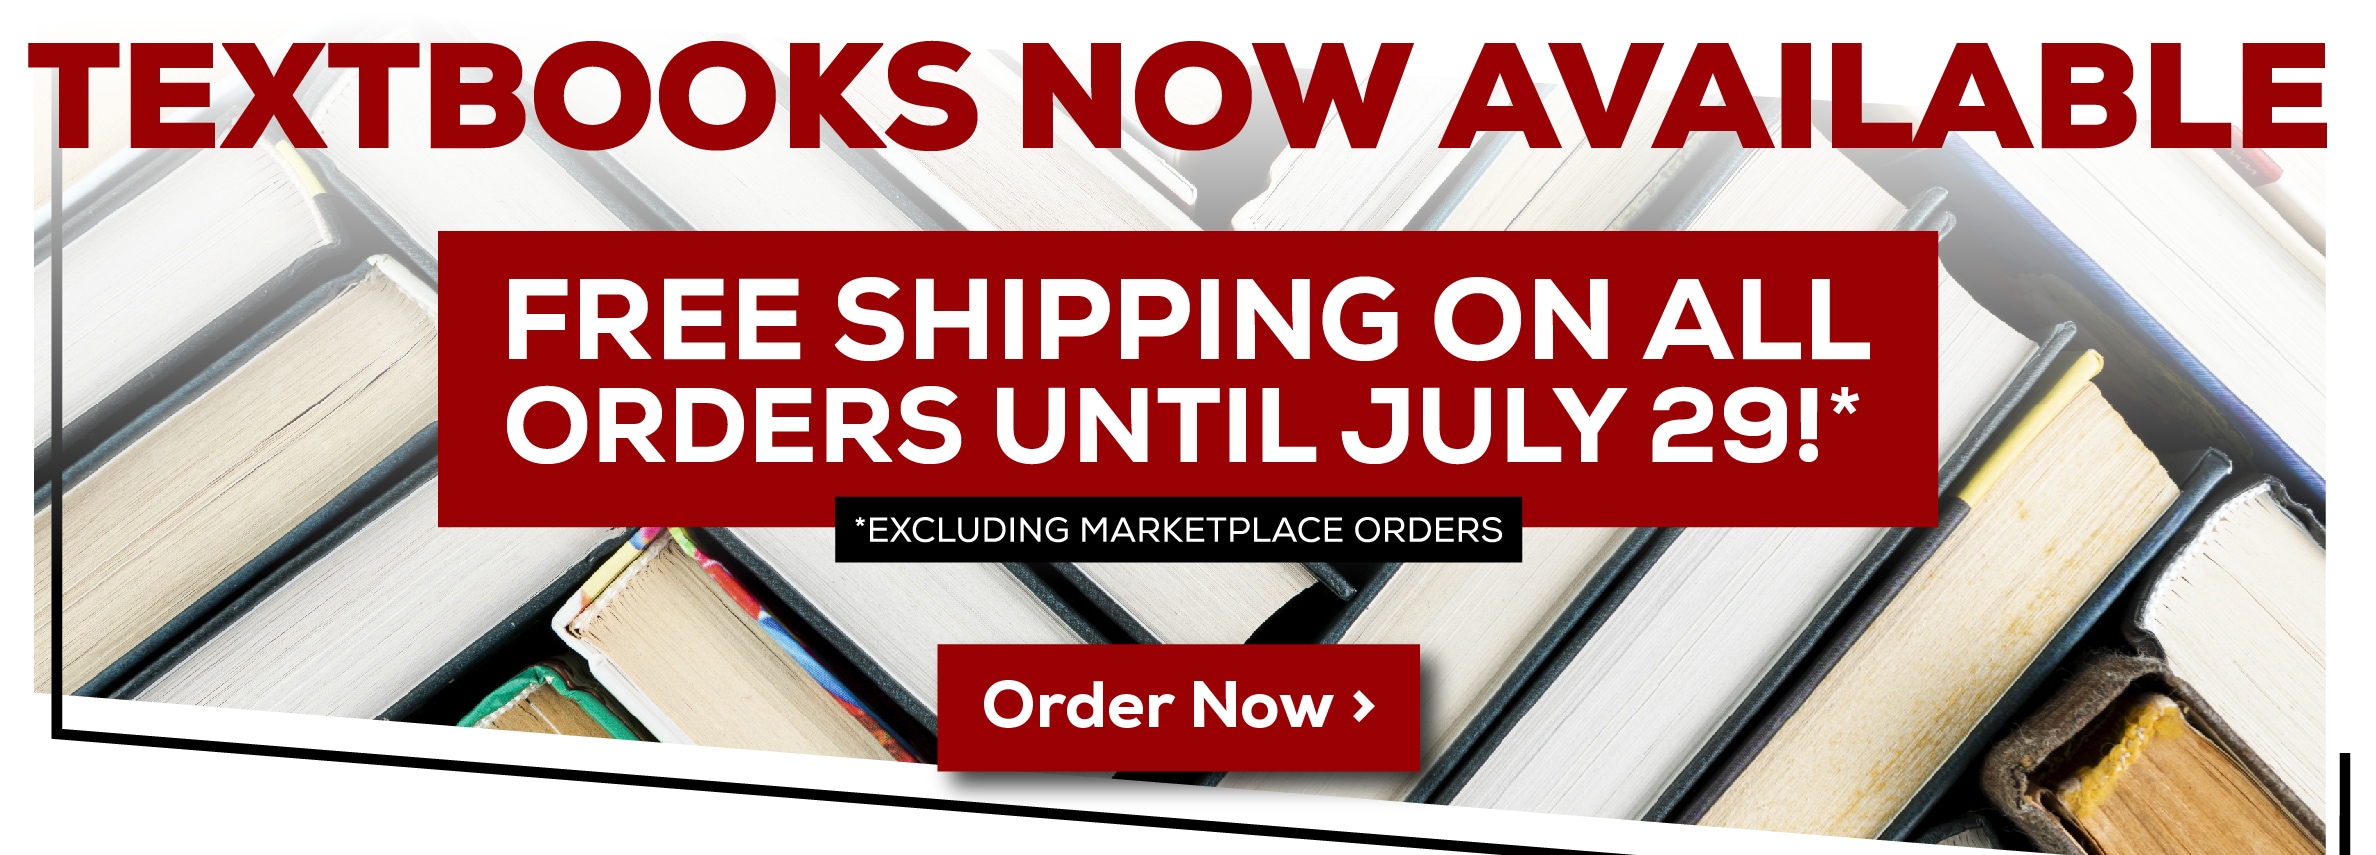 Textbooks Now Available. Free shipping on all orders until July 29. Excluding marketplace orders. Order now!